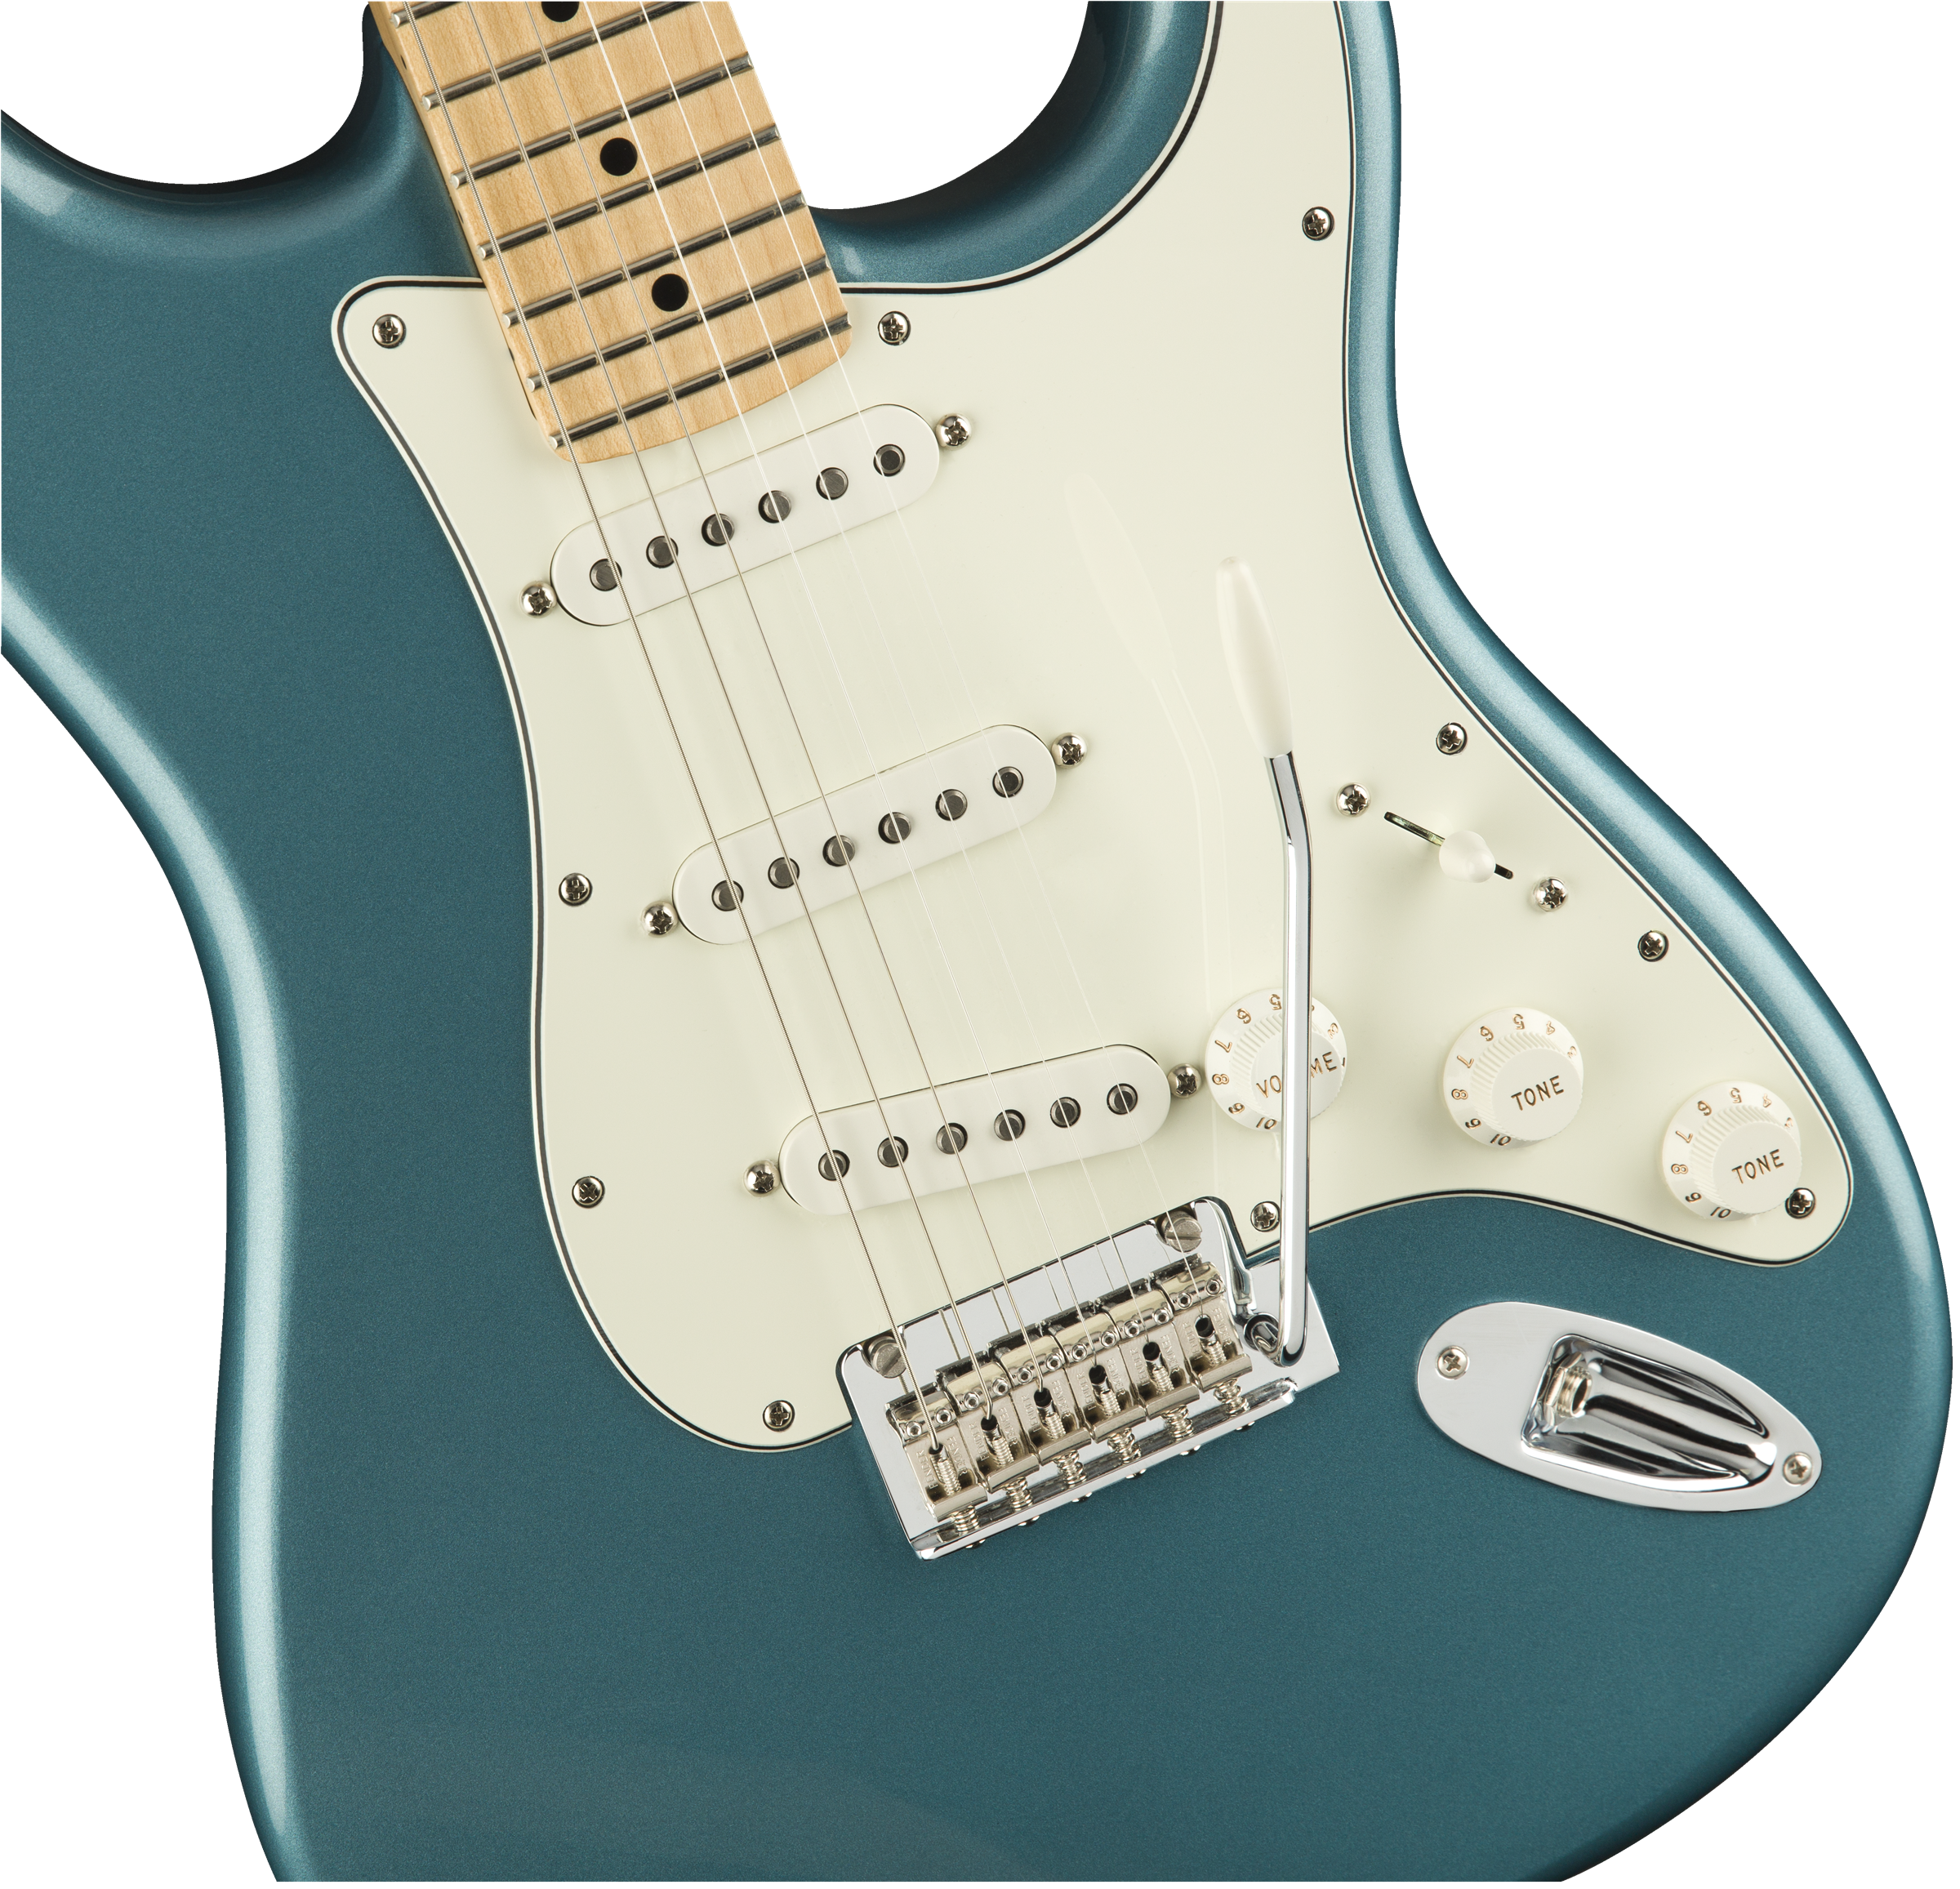 Fender Player Series Stratocaster (Tidepool) - Electric Guitar 電結他